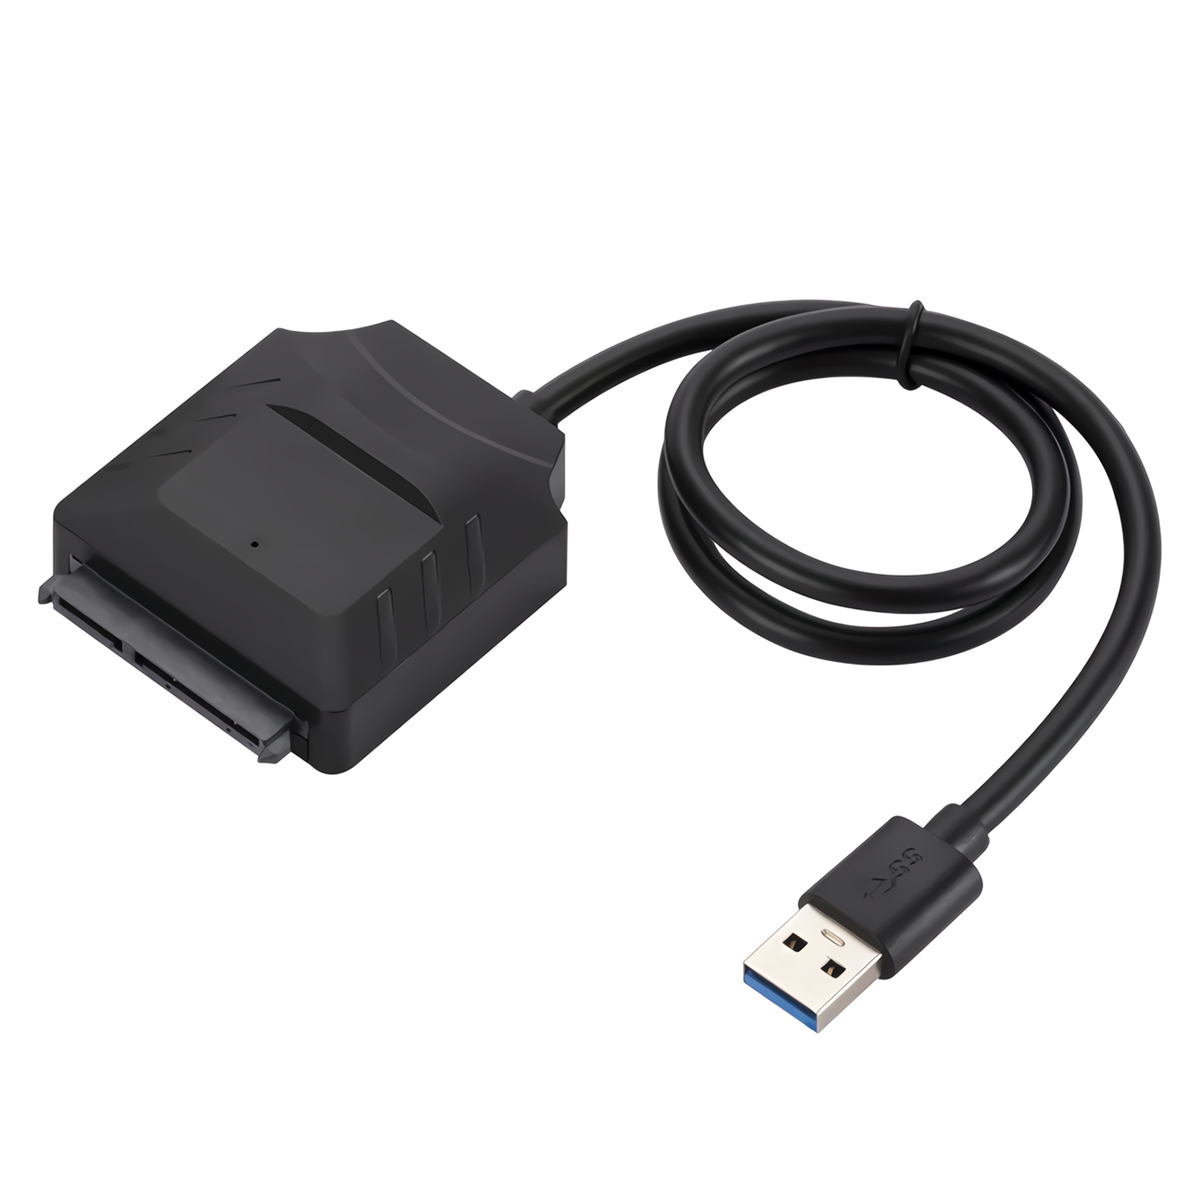 

MnnWuu SSD HDD USB 3.0 to SATA Converter Cable Hard Drive Converter Adapter Support 2.5 / 3.5" HDD SSD